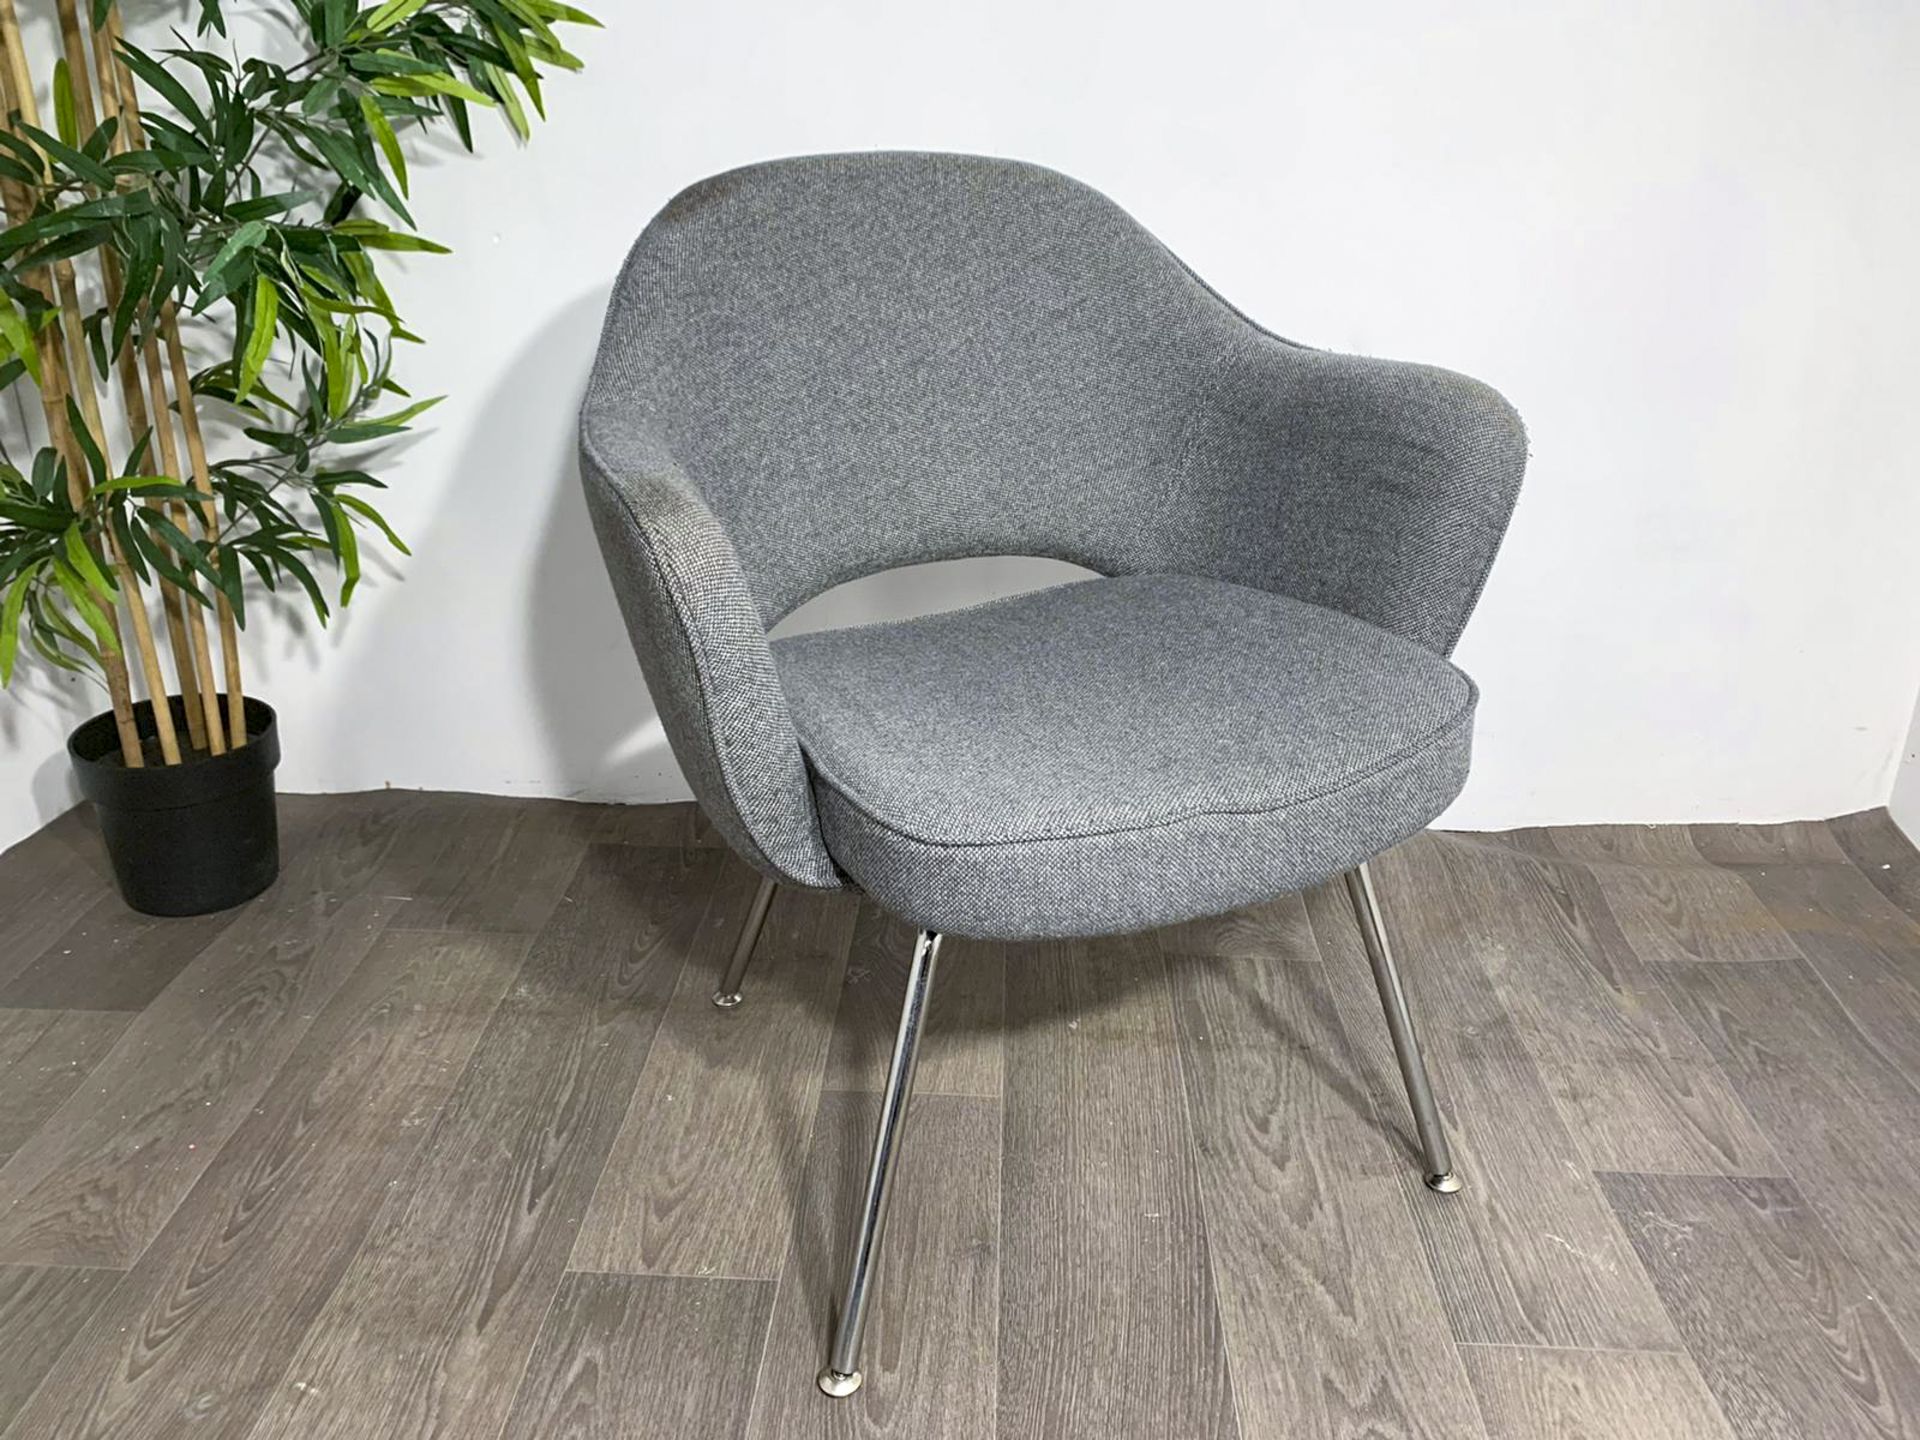 Grey Fabric Commercial Grade Chair with Chrome Legs x2 - Image 4 of 8